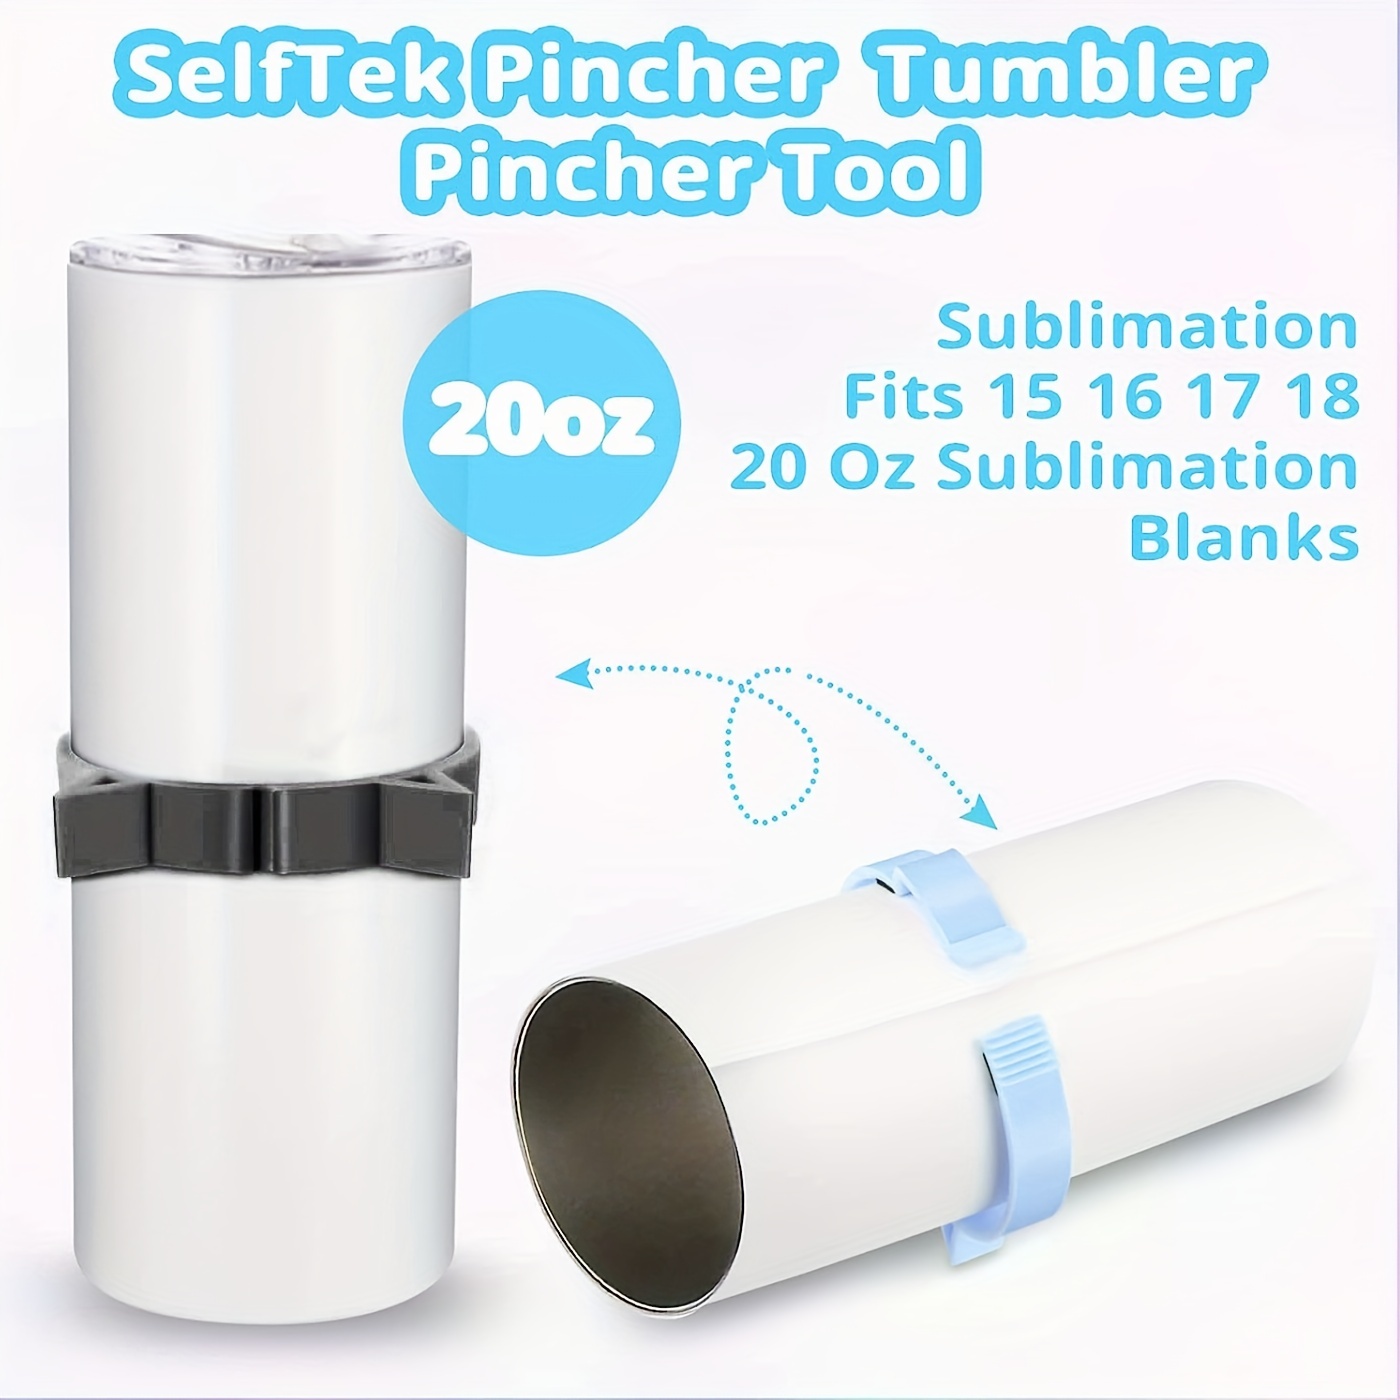 Sublimation Tumblers Pinch 6 Packs,2 Pcs Cup Sublimation Tools,Perfect Pinch Tumbler Pincher for Secure Hold and Grip.